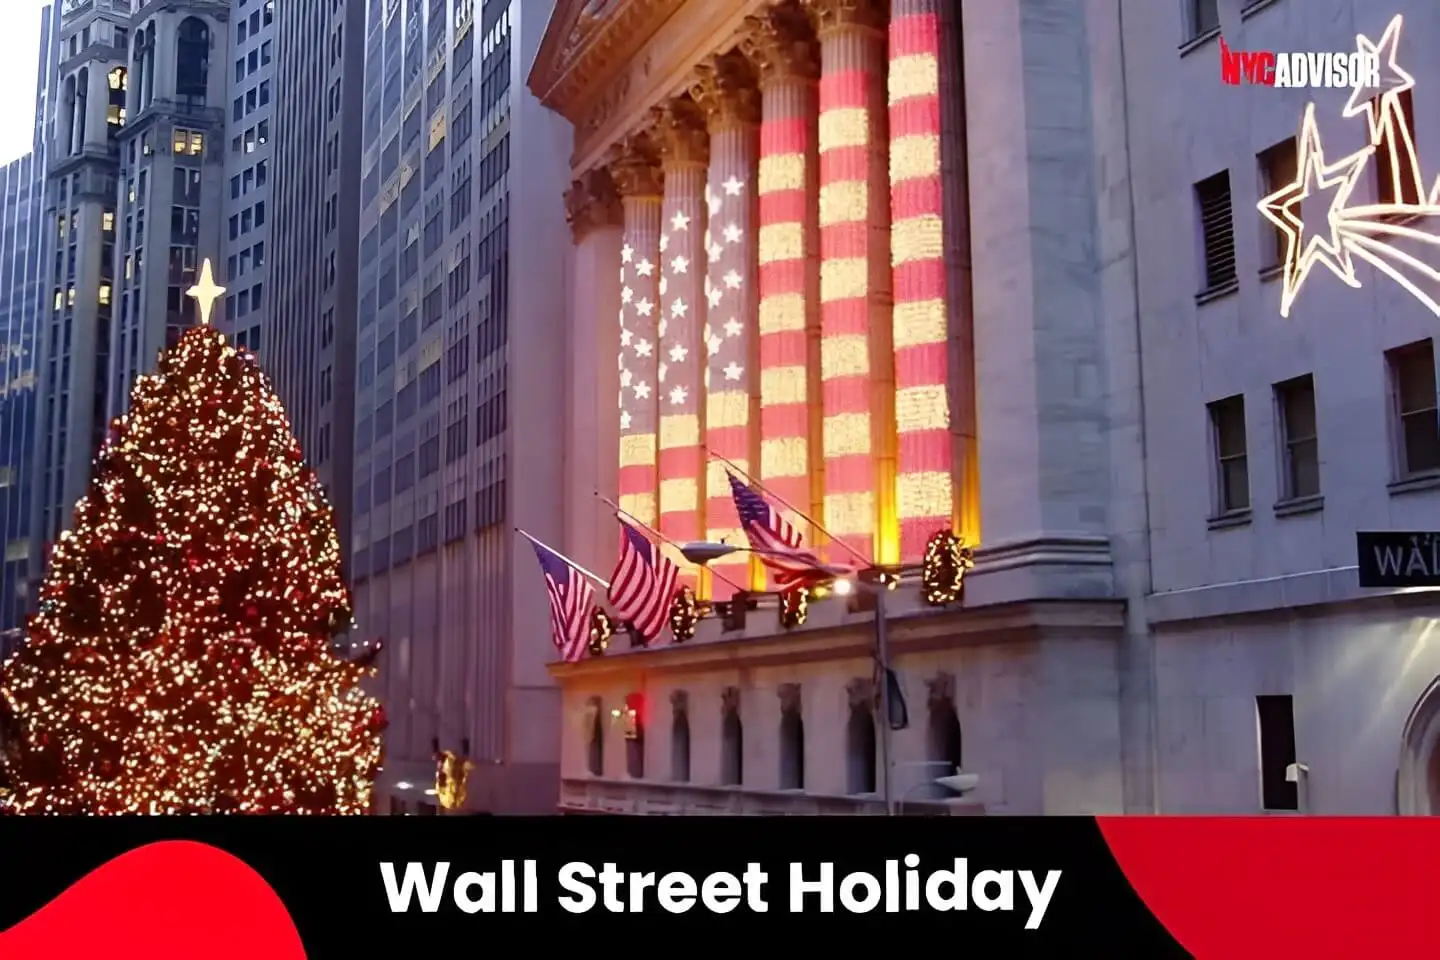 Wall Street Holiday Decorations in NYC